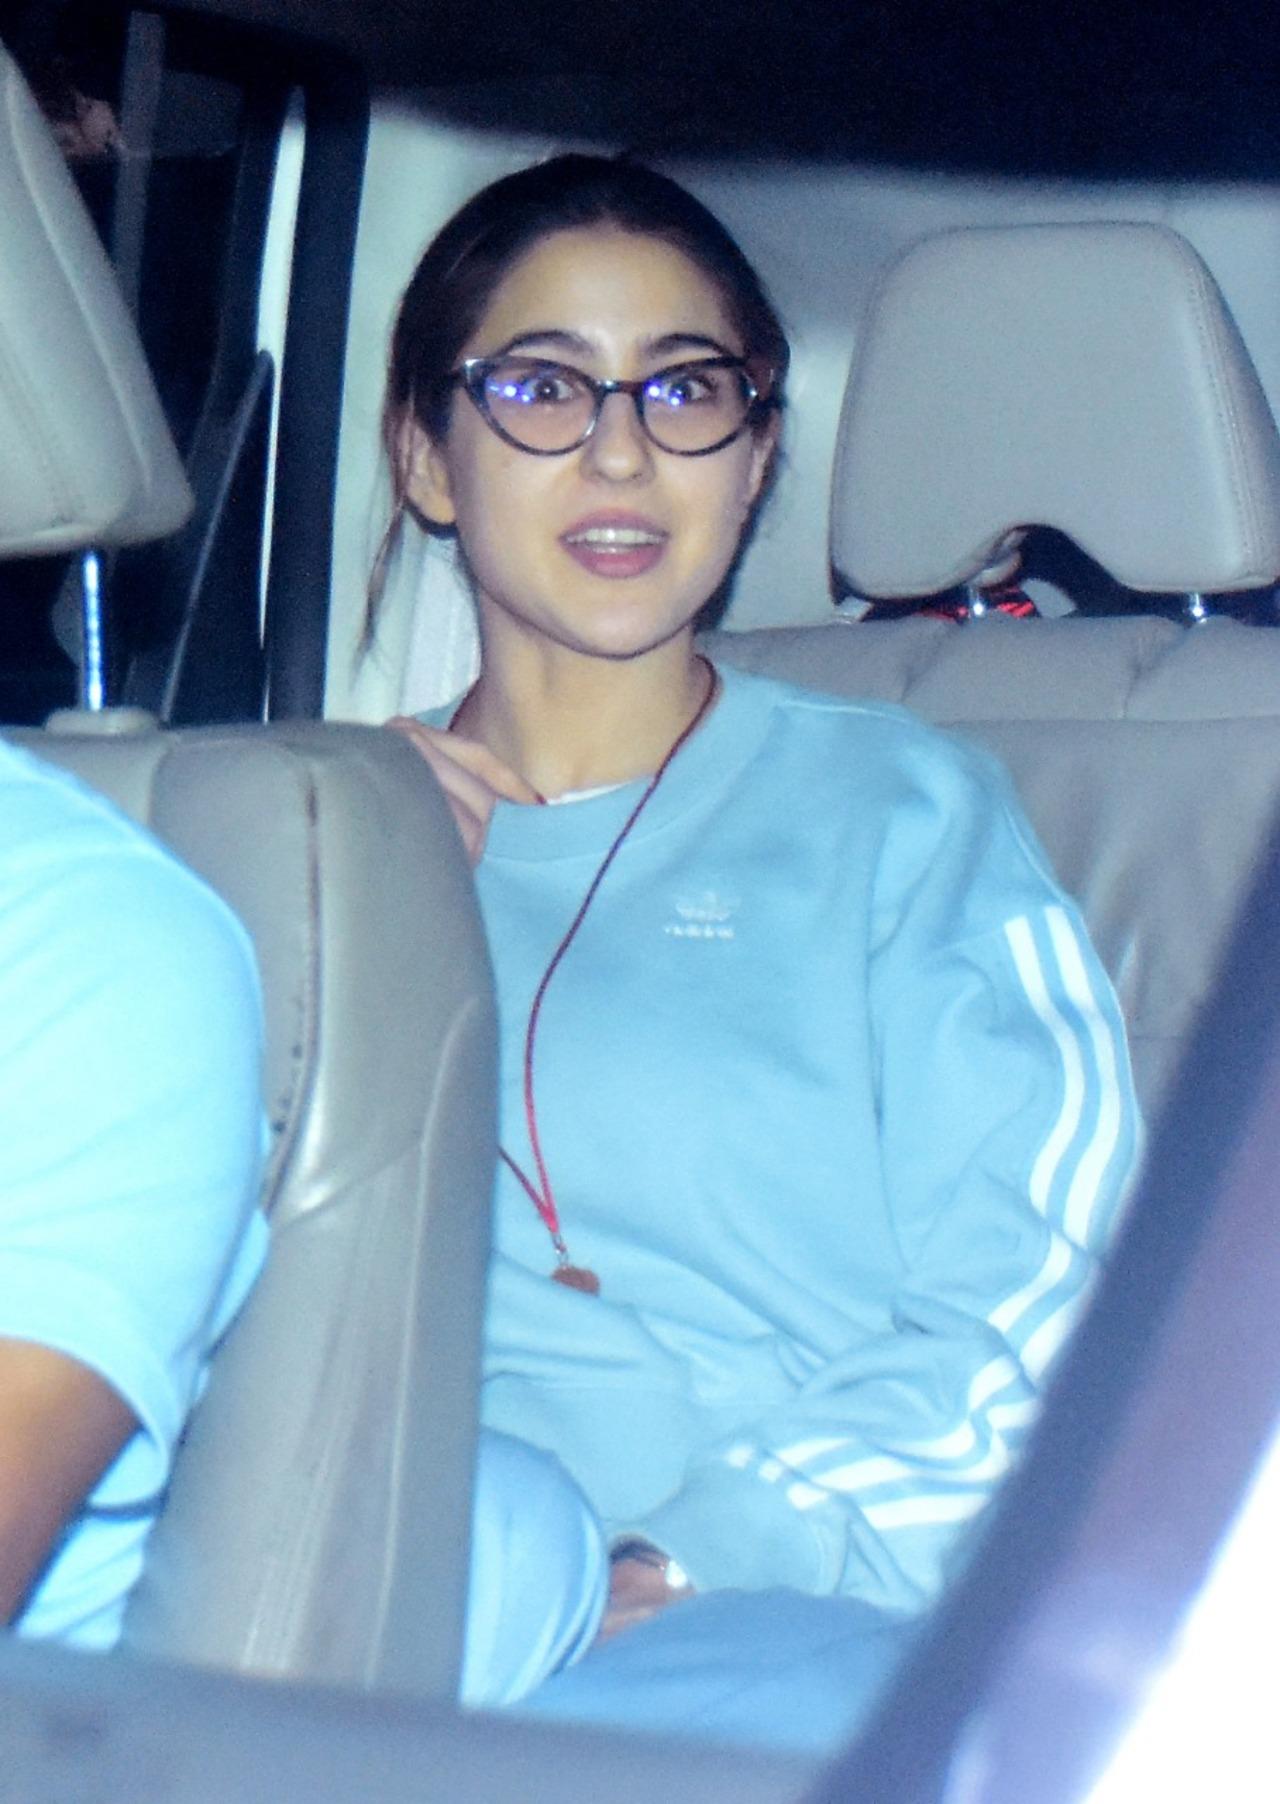 Sara Ali Khan was spotted in her car outside Kalina airport, donning a blue tracksuit with white stripes. The actress seemed to be both astonished and flattered by the paparazzi